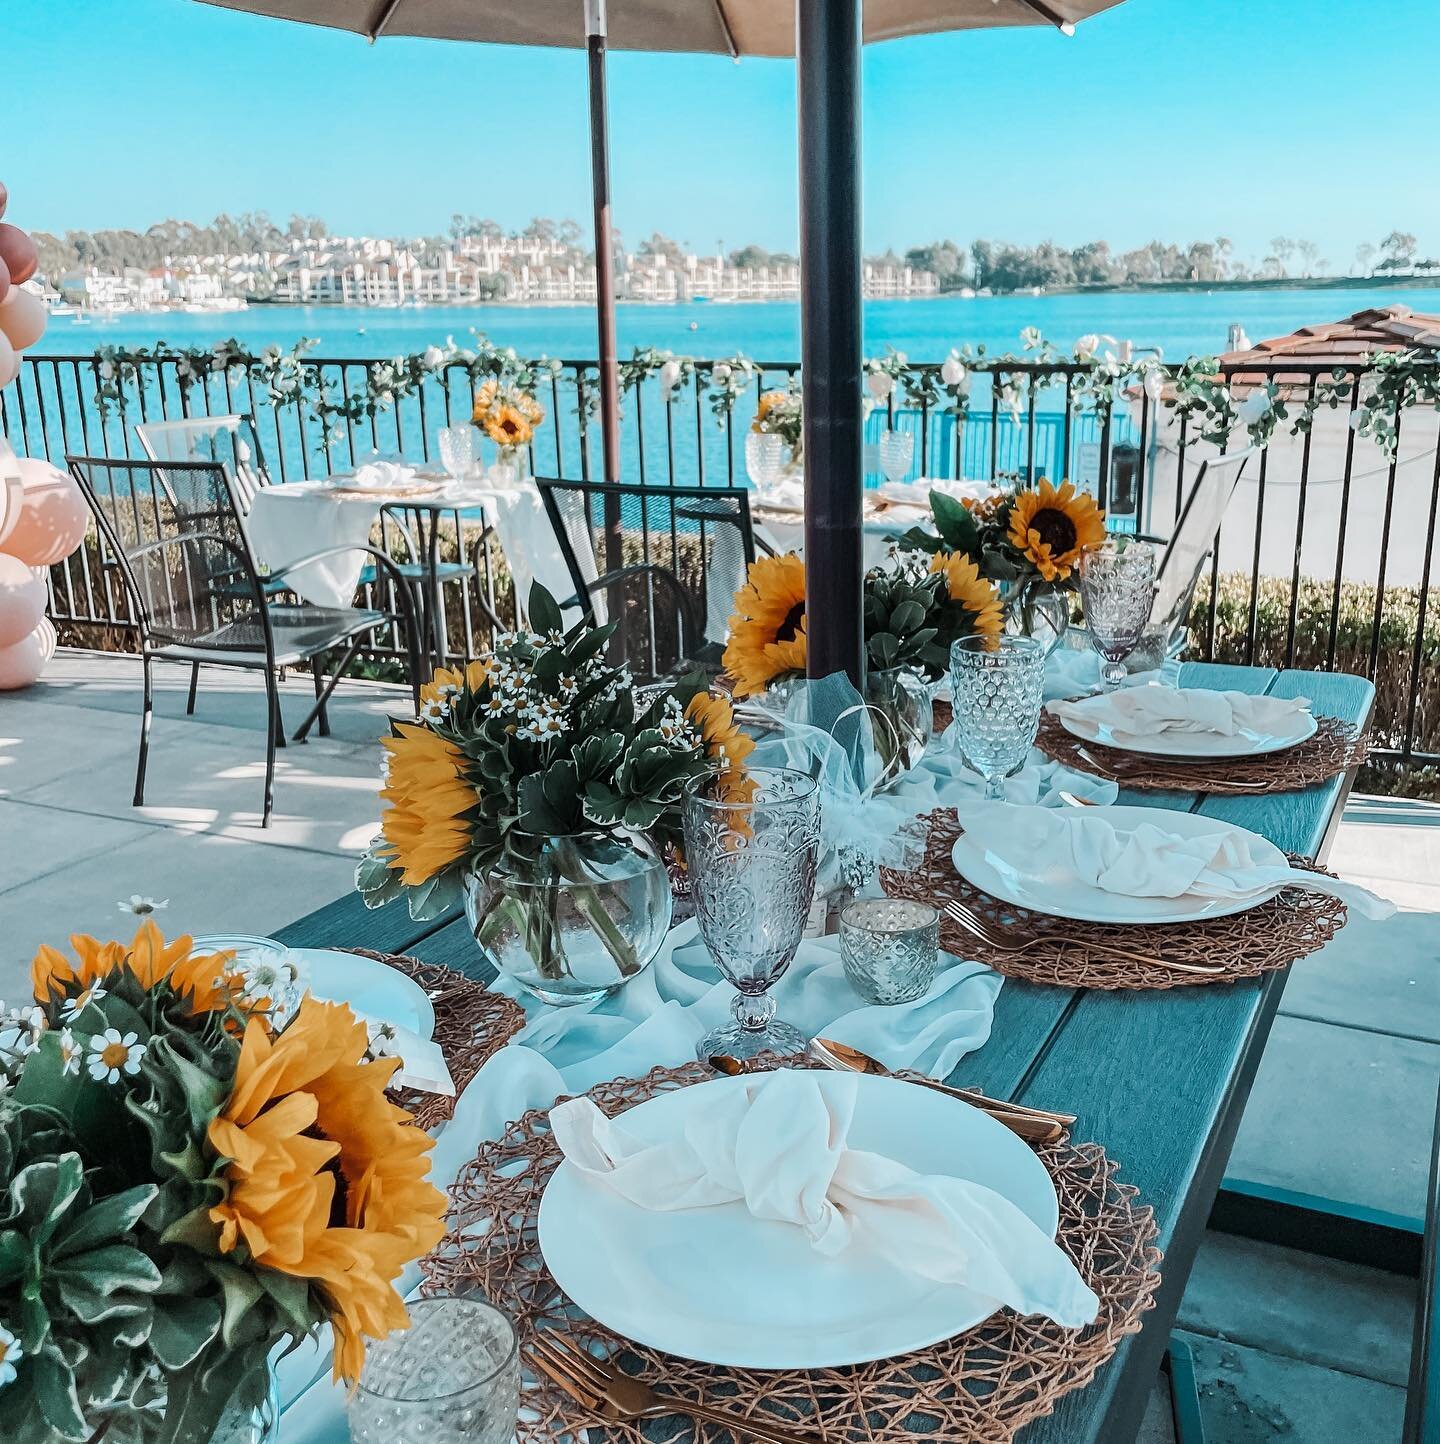 Jumping into fall planning and reminiscing on these gorgeous events! 
.
.
.
.
#hellopicnicoc #letussetthetableforyou #picnicsoc #beaches #parks #social #ocevents #picnic #cheeseboard #charcuterieboard #grazingboard #decor #aesthetic #socialgatherings